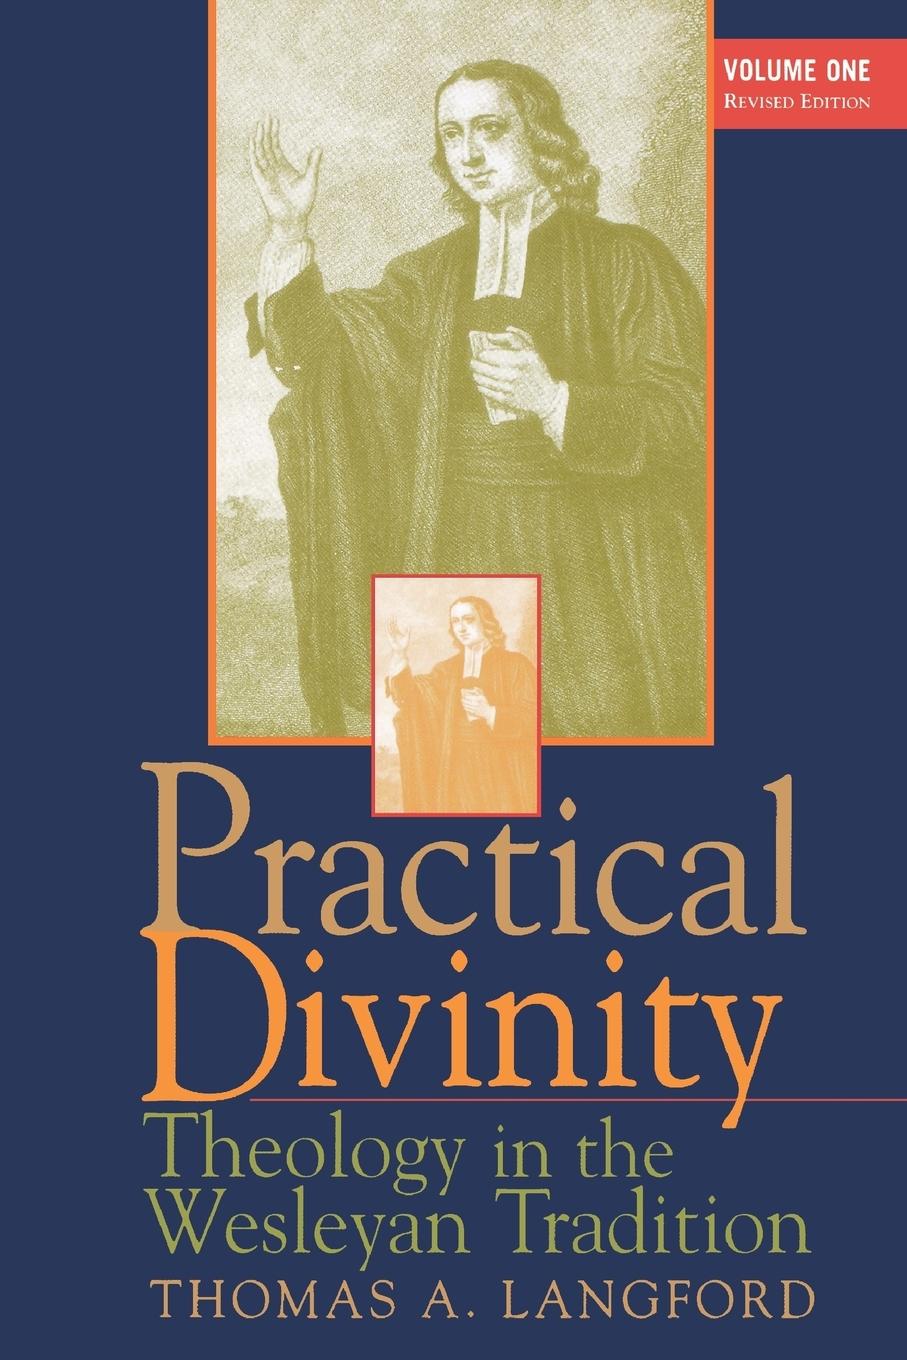 Practical Divinity Volume 1 / Theology in the Wesleyan Tradition / Thomas A. Langford / Taschenbuch / Paperback / Englisch / 1998 / Abingdon Press / EAN 9780687073825 - Langford, Thomas A.